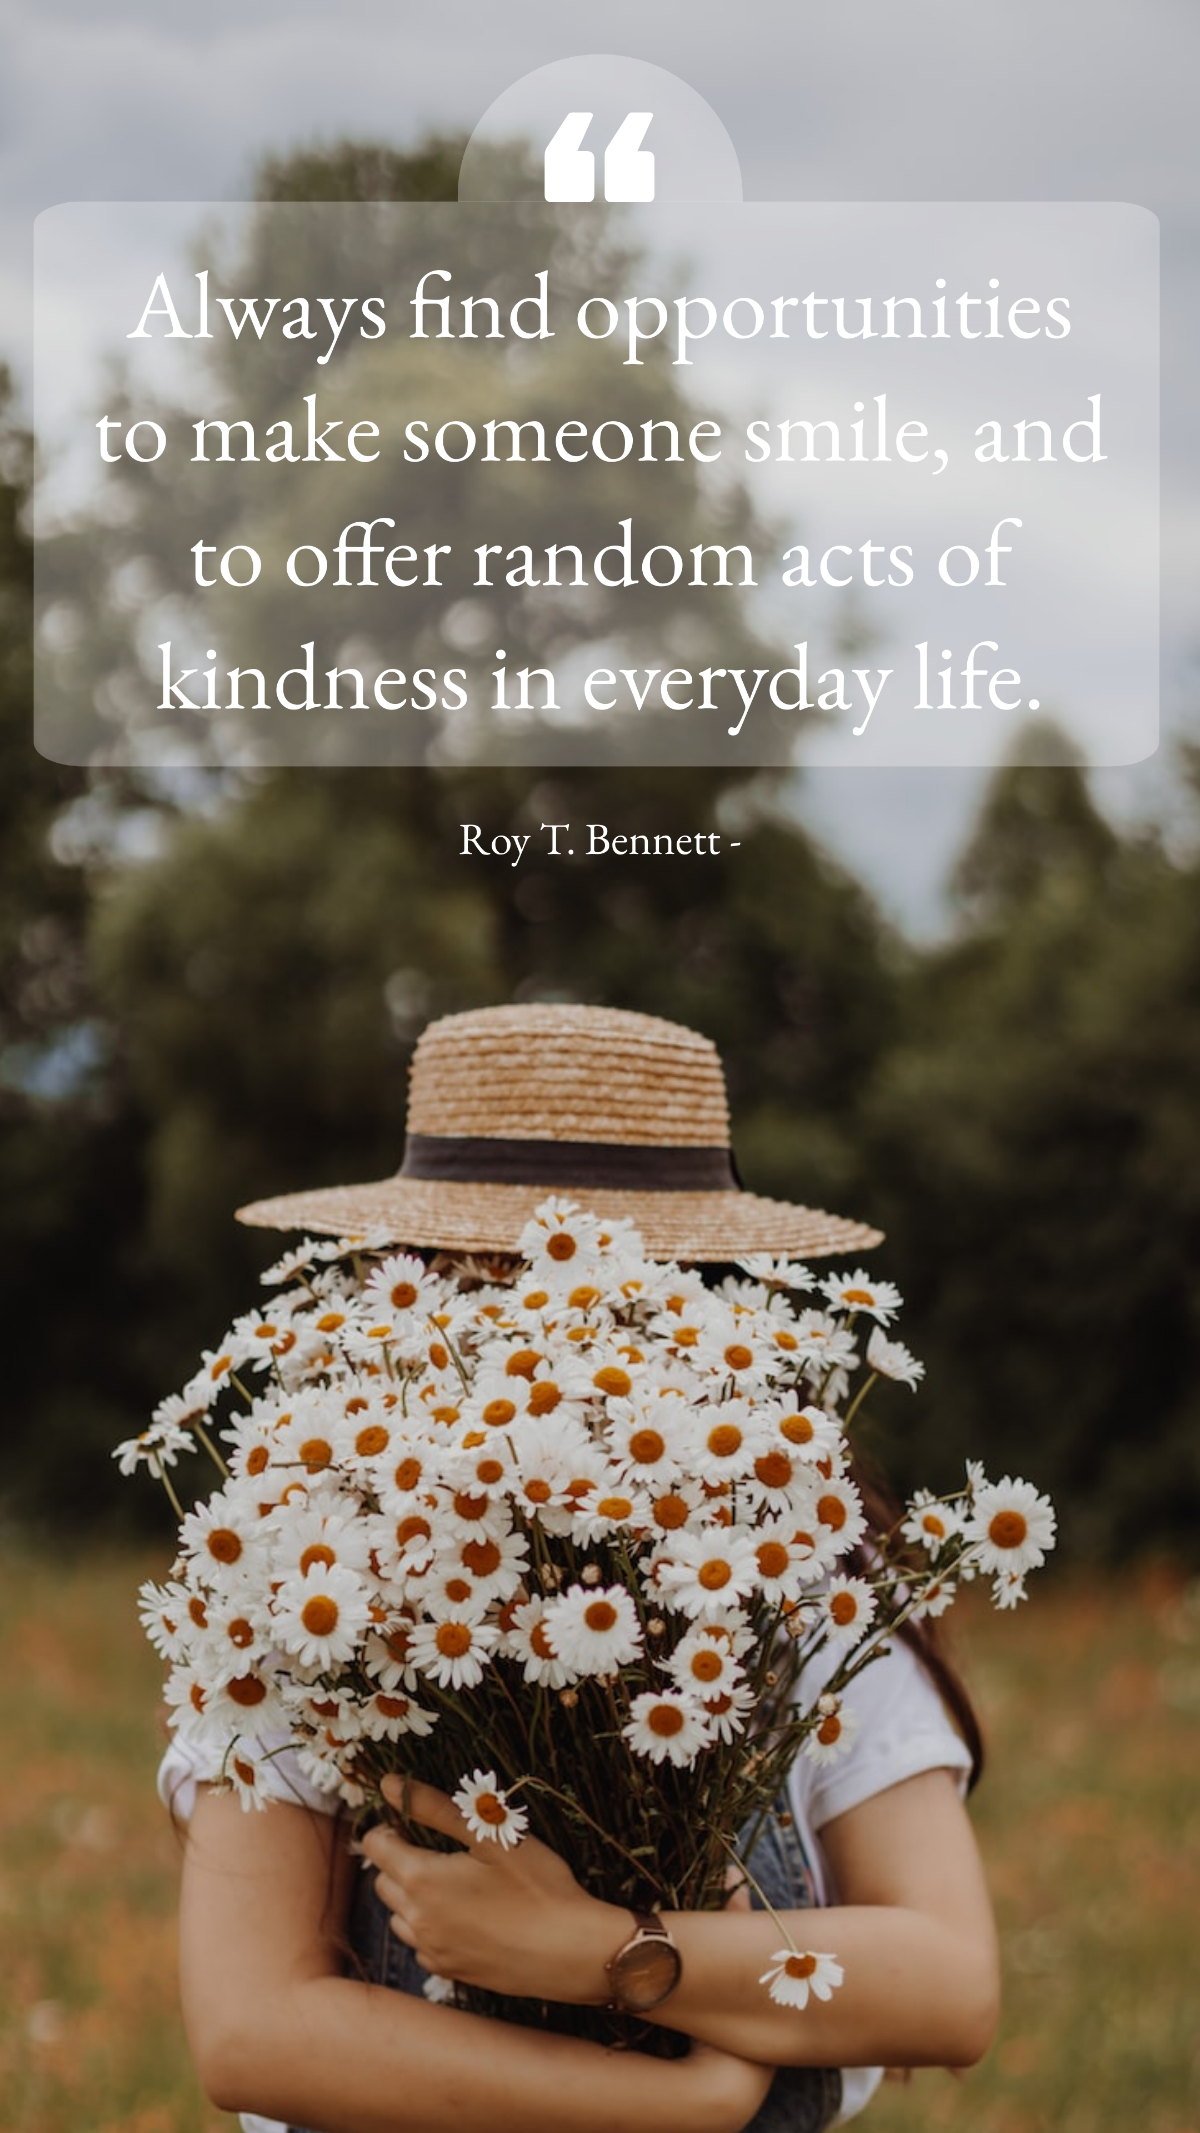 Roy T. Bennett - “Always find opportunities to make someone smile, and to offer random acts of kindness in everyday life. Template